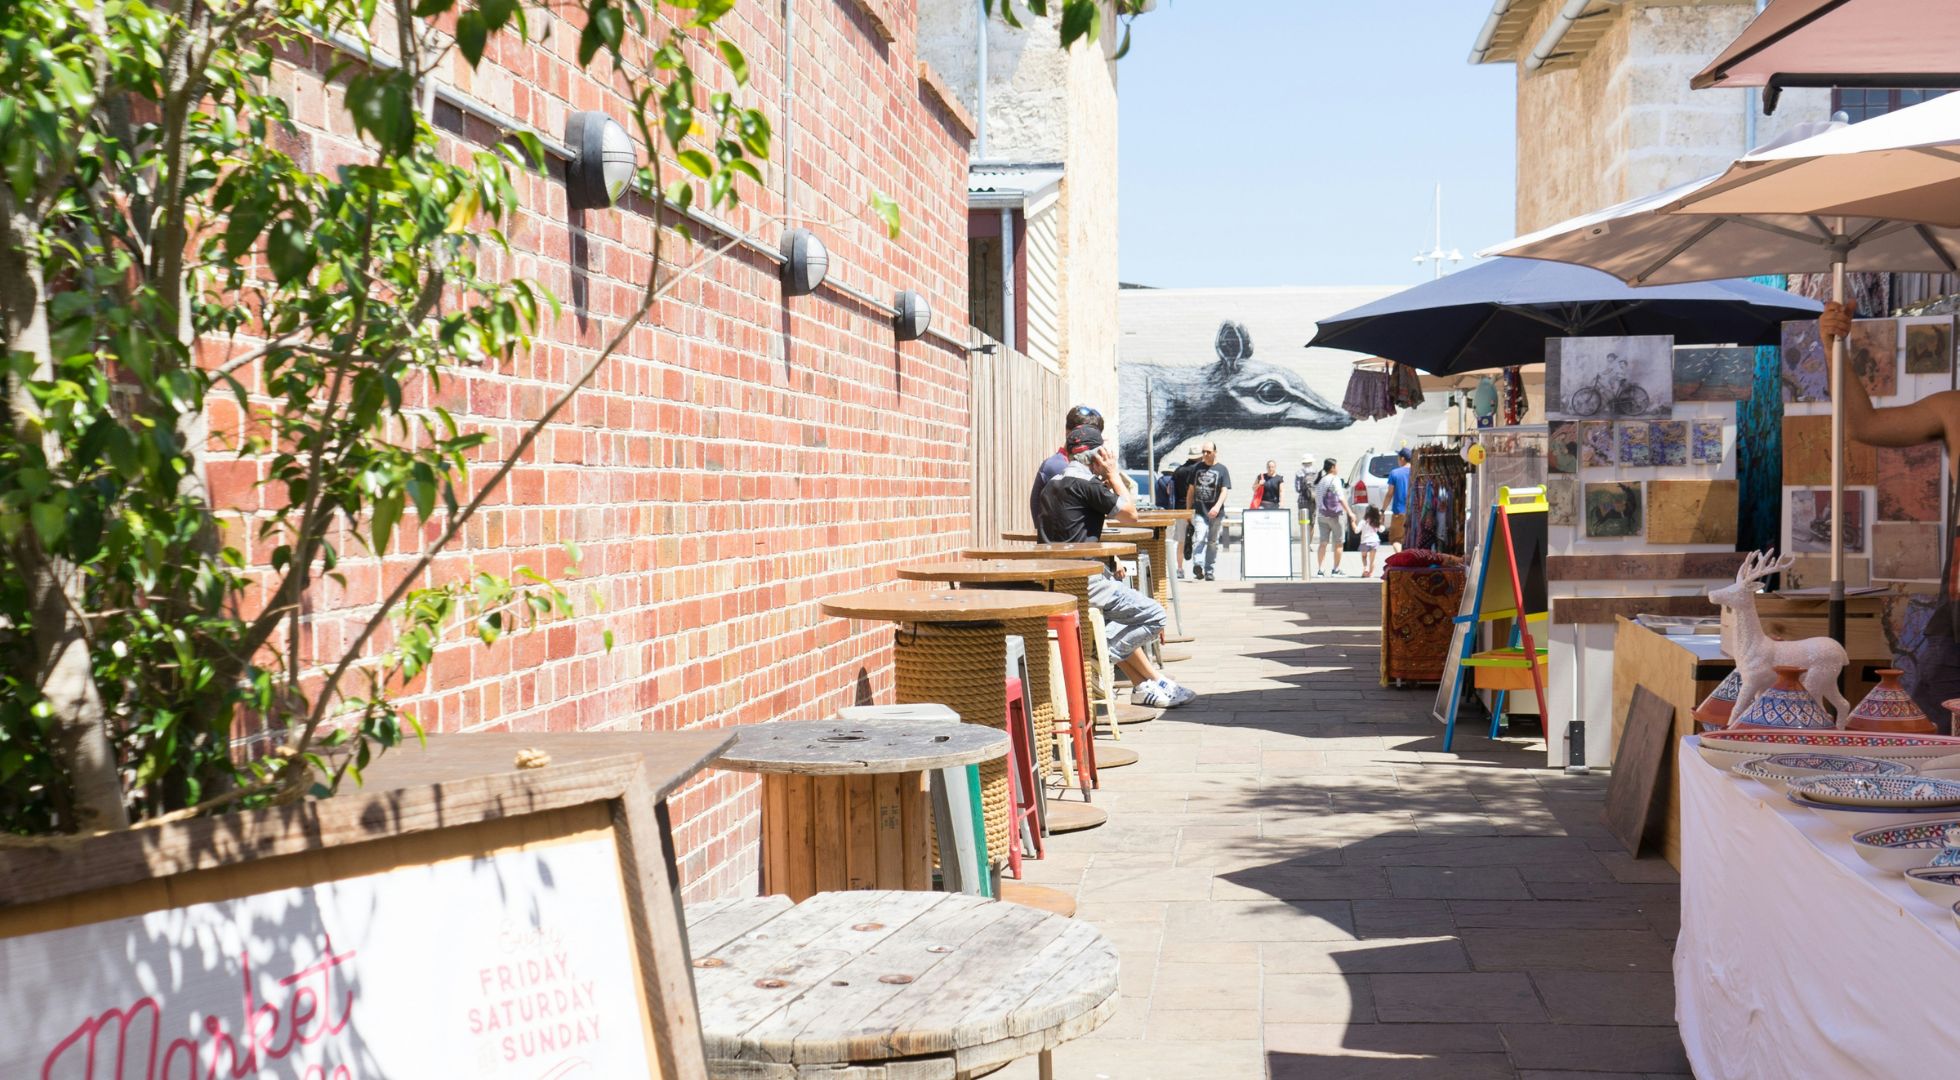 Image of Fremantle markets to show one of the places to visit on a Perth solo travel guide. 